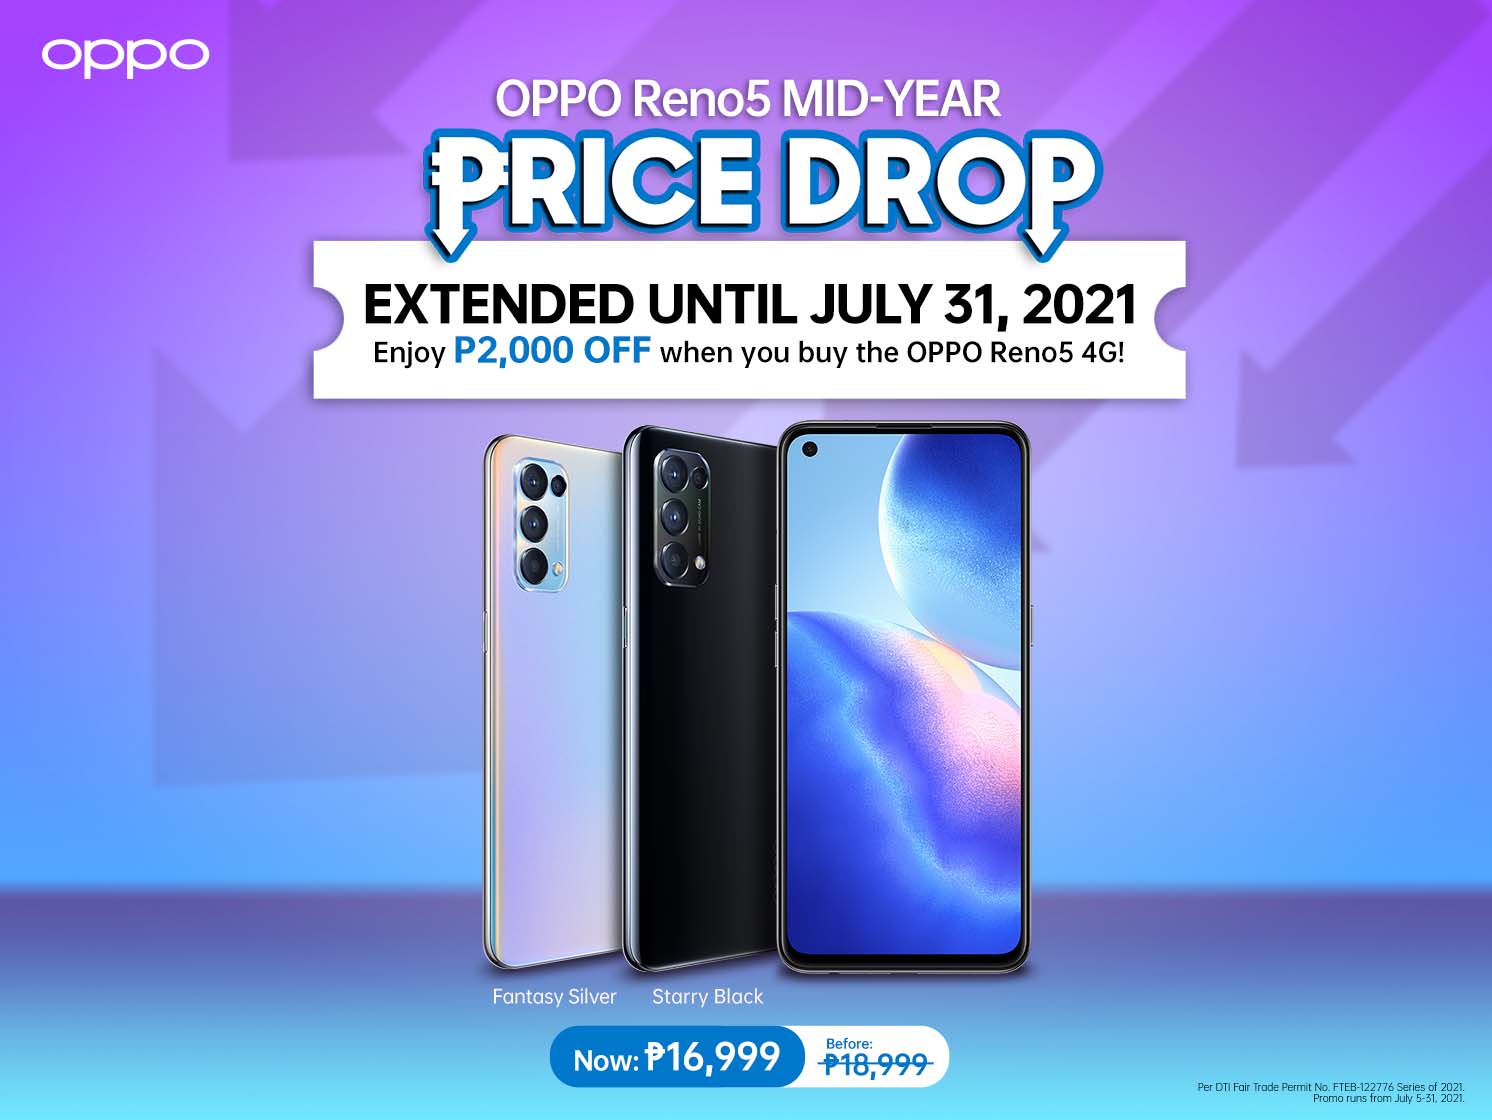 Score Up To PHP2,000 Off on OPPO Reno5 4G and A15s Price Drop until July 31